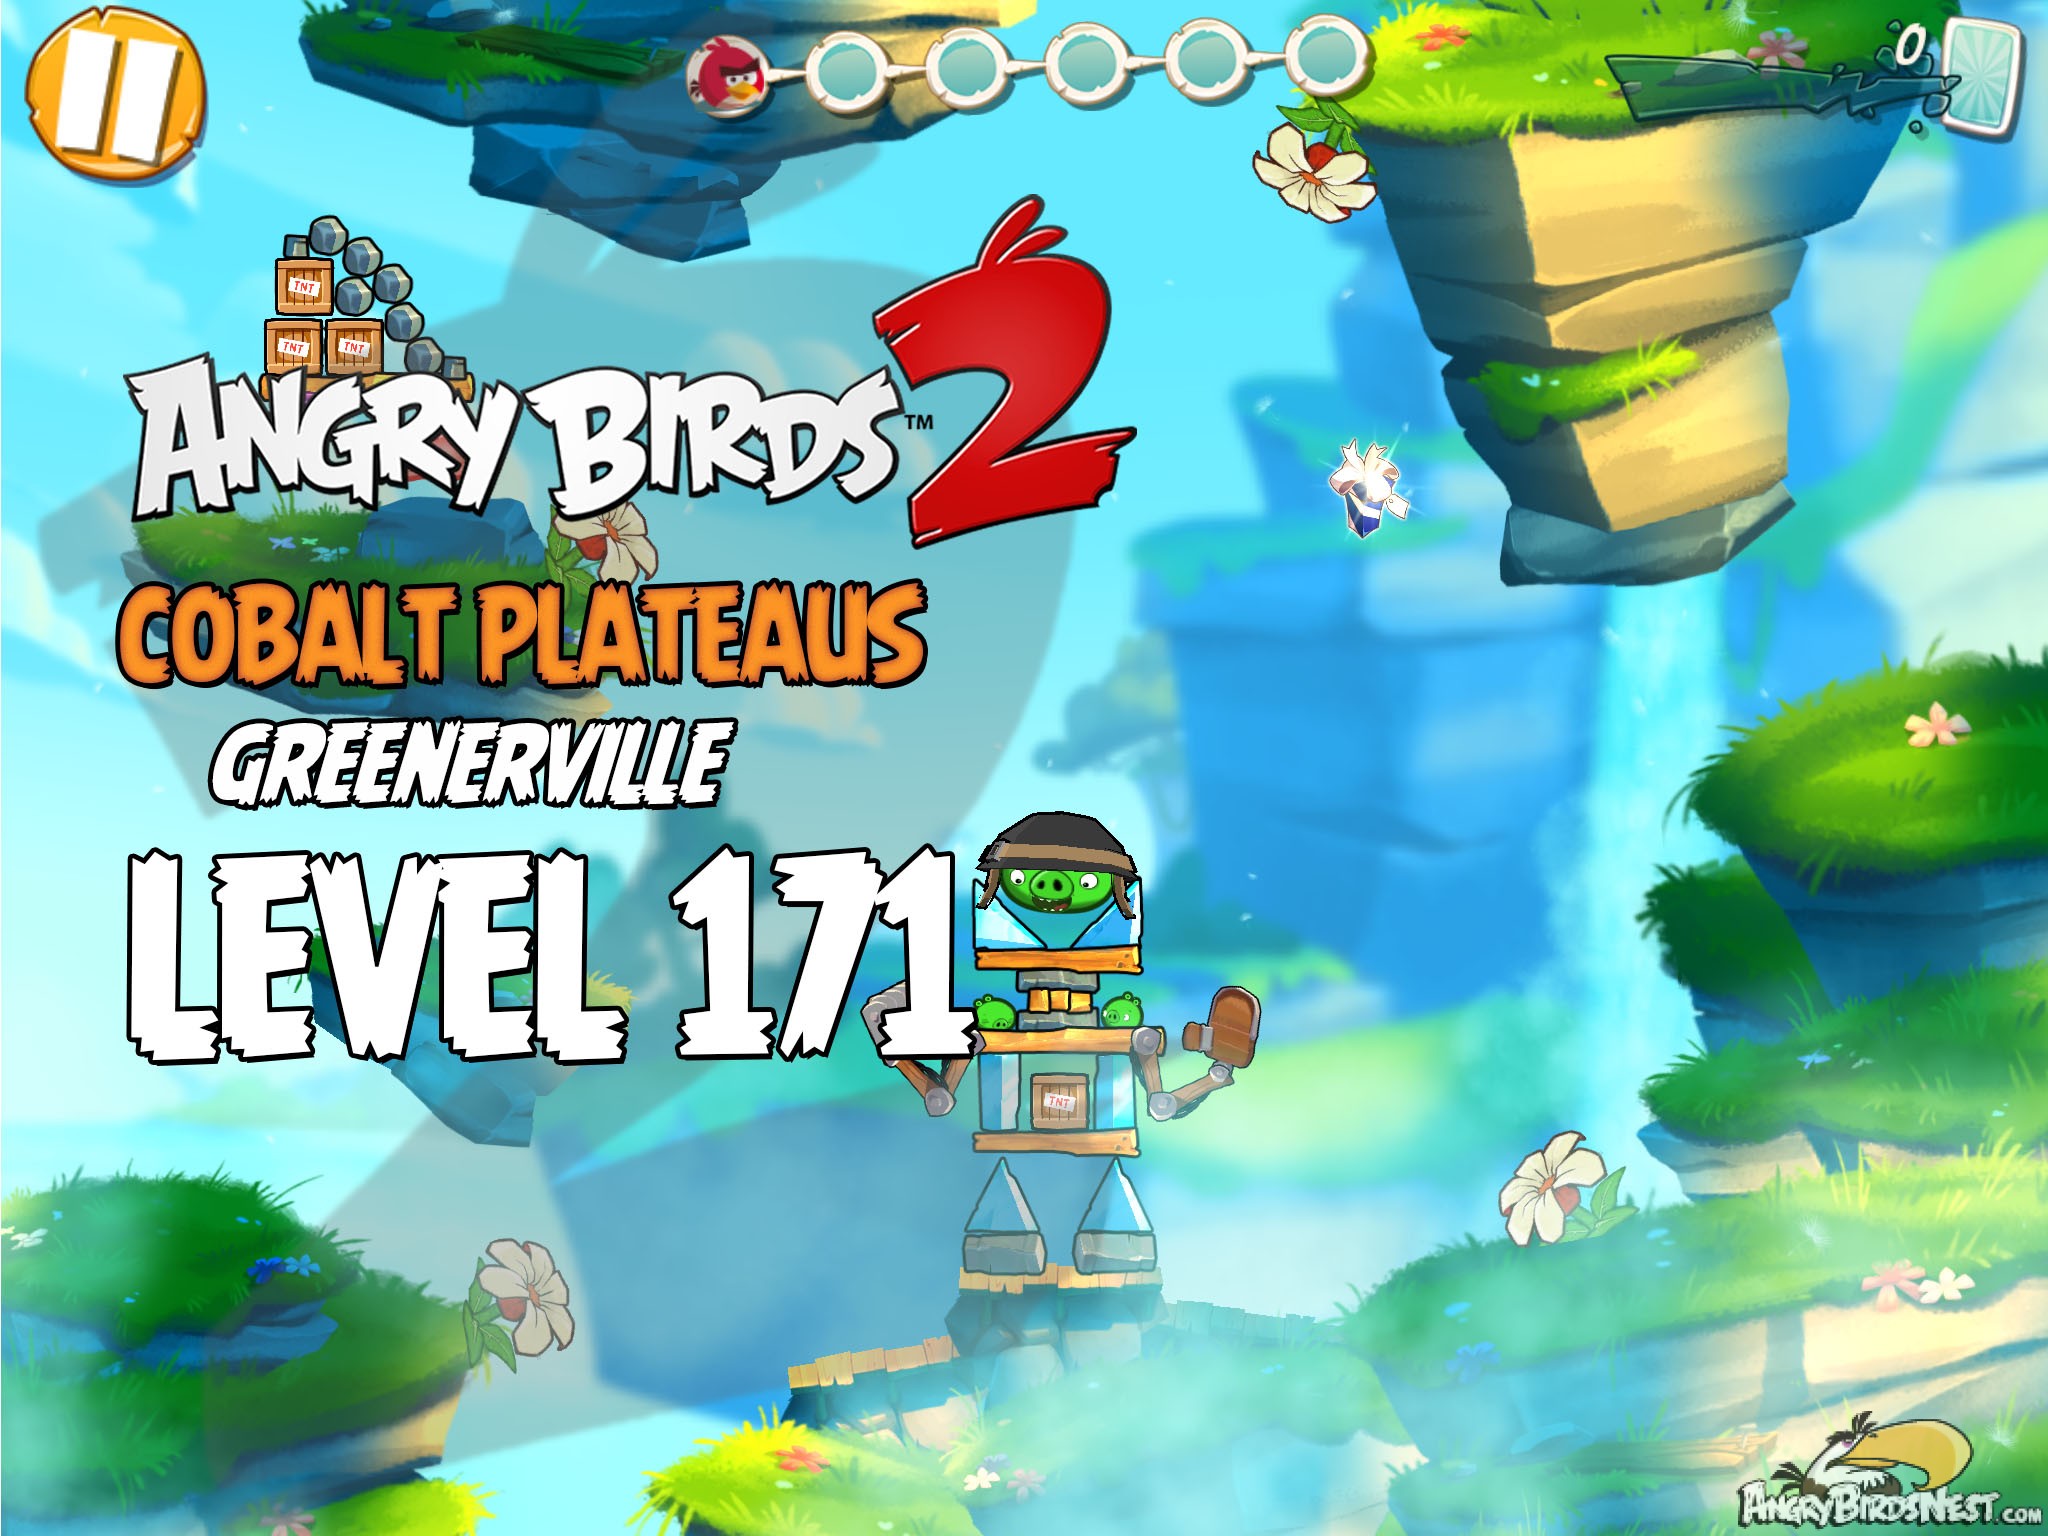 Angry Birds 2 Cobalt Plateaus Greenerville Level 171